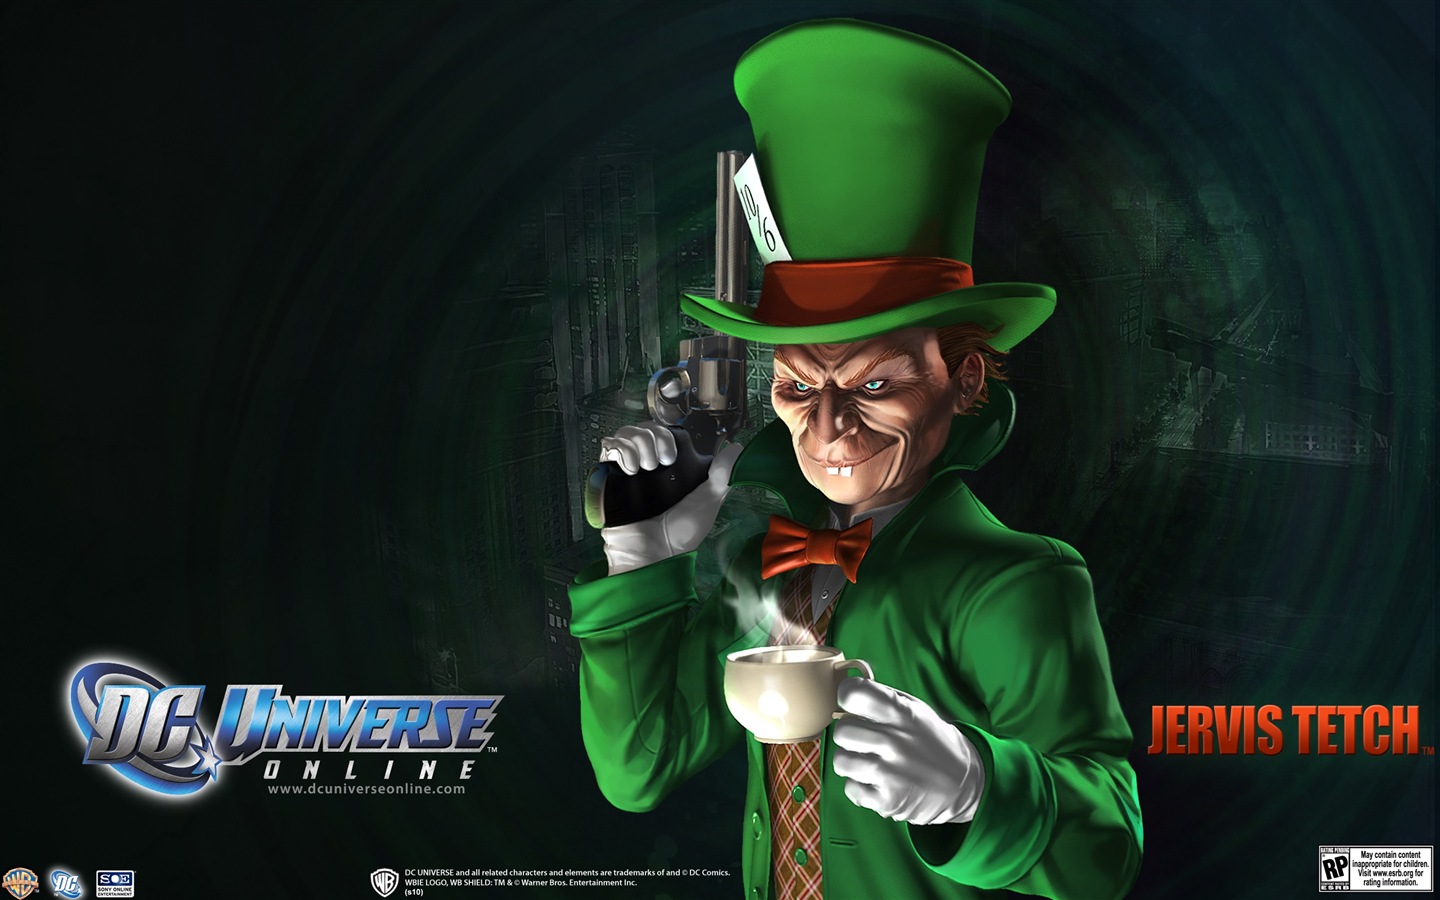 DC Universe Online HD game wallpapers #21 - 1440x900